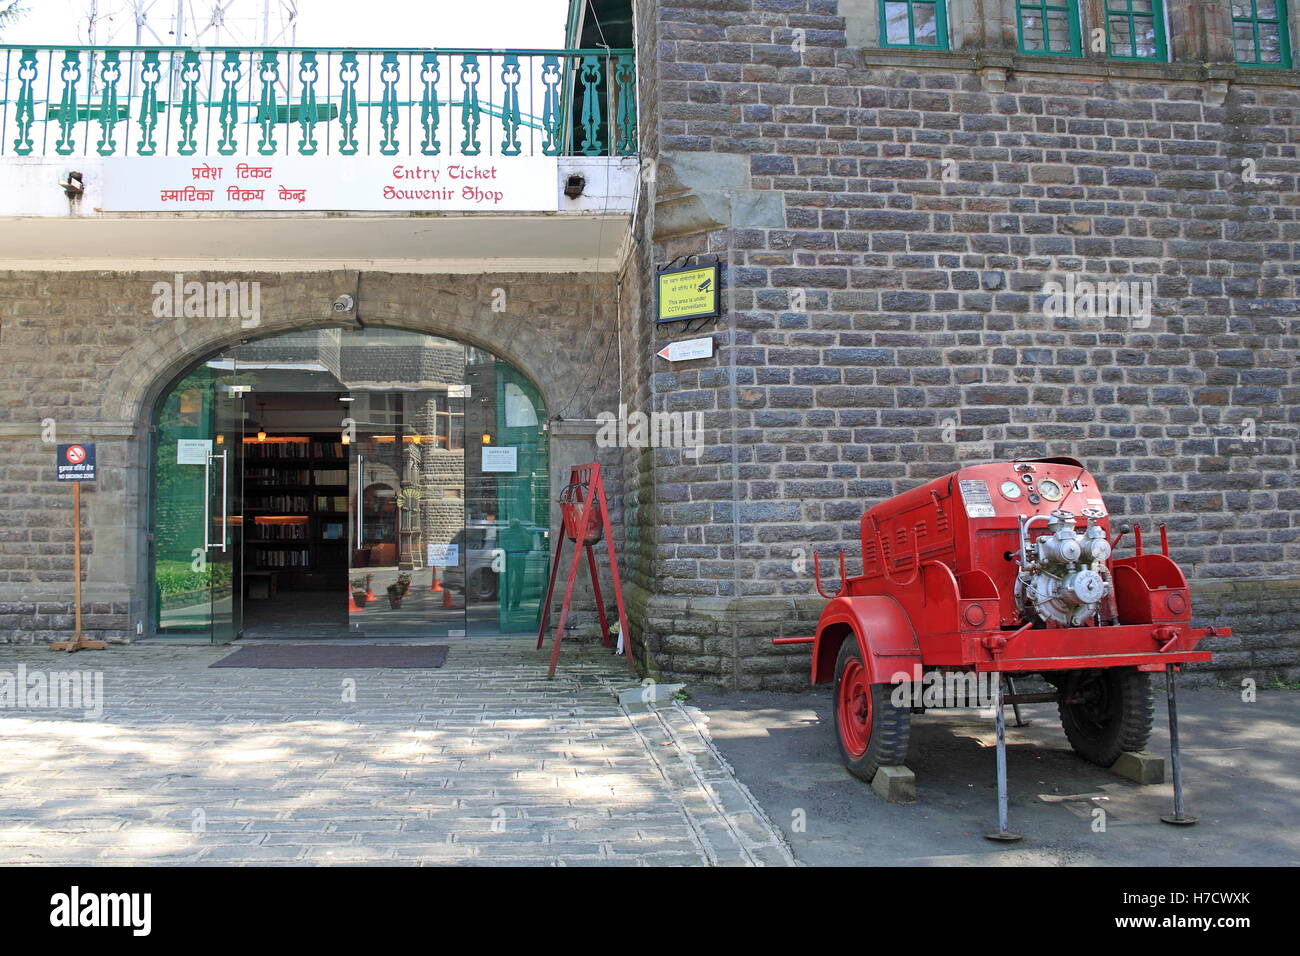 Viceregal Lodge Fire Station Cafe, Shimla, Himachal Pradesh, India, Indian subcontinent, South Asia Stock Photo